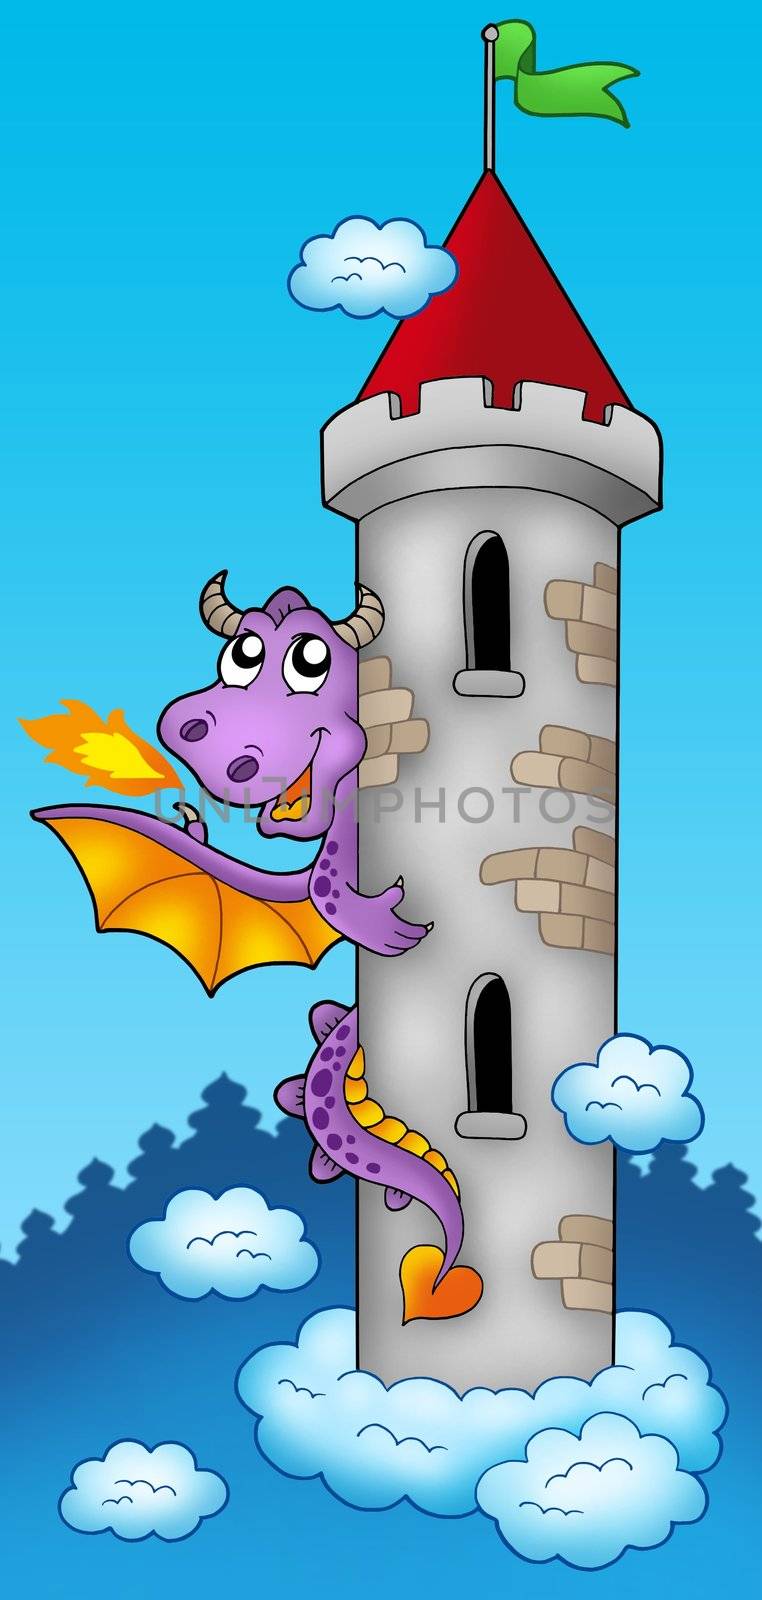 Purple dragon on castle tower by clairev